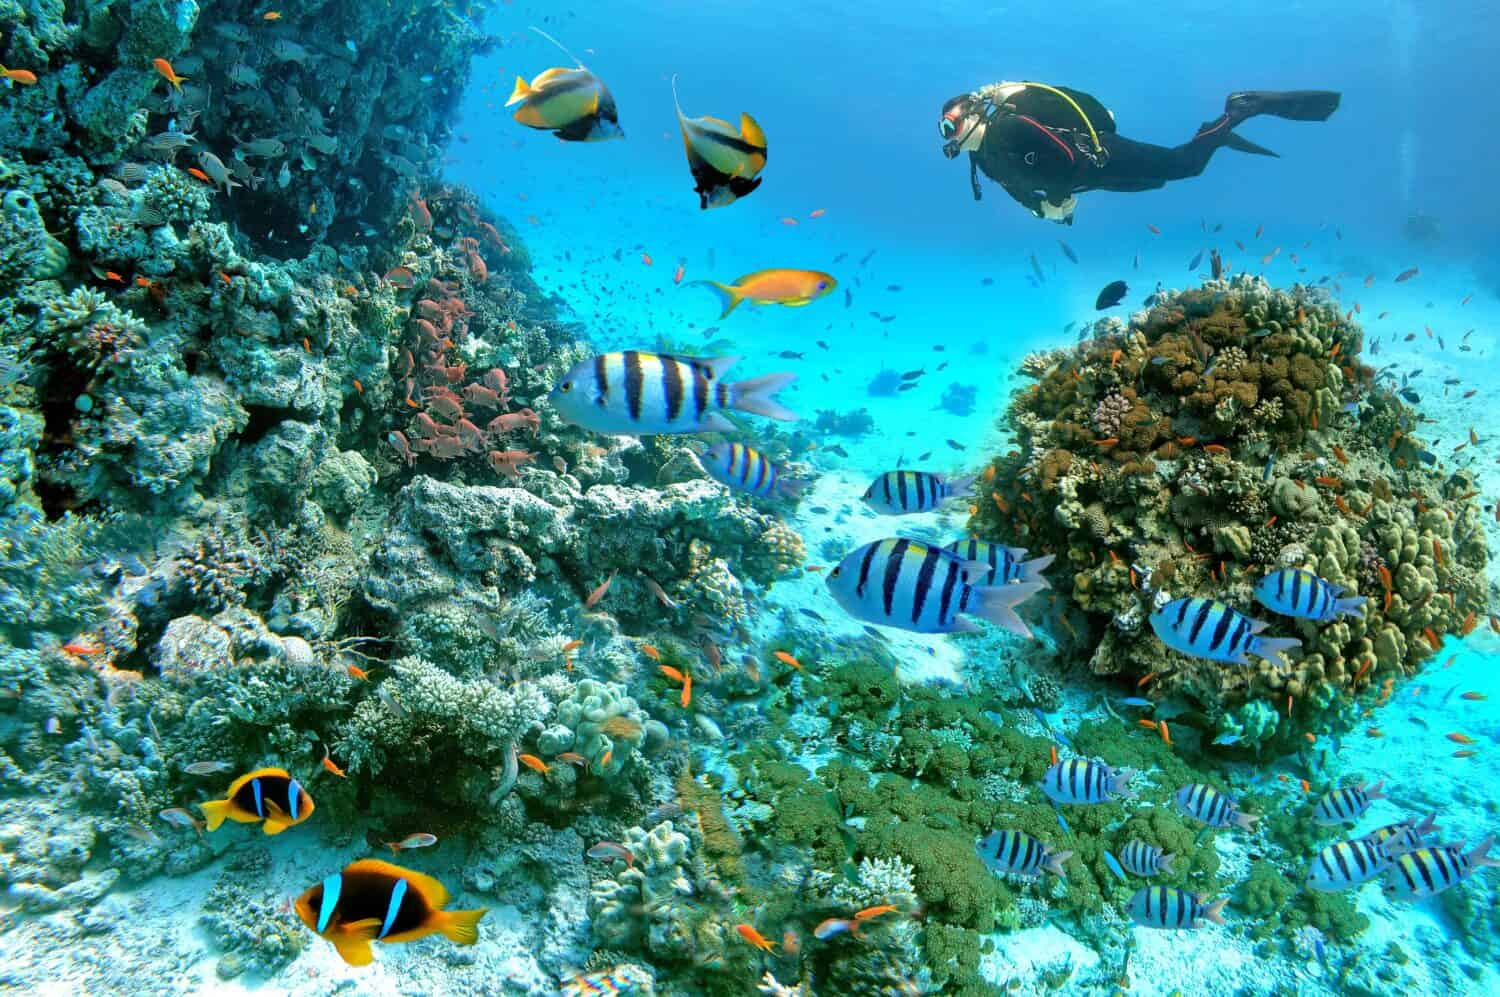 Underwater scene with exotic fishes with a diver and coral reef